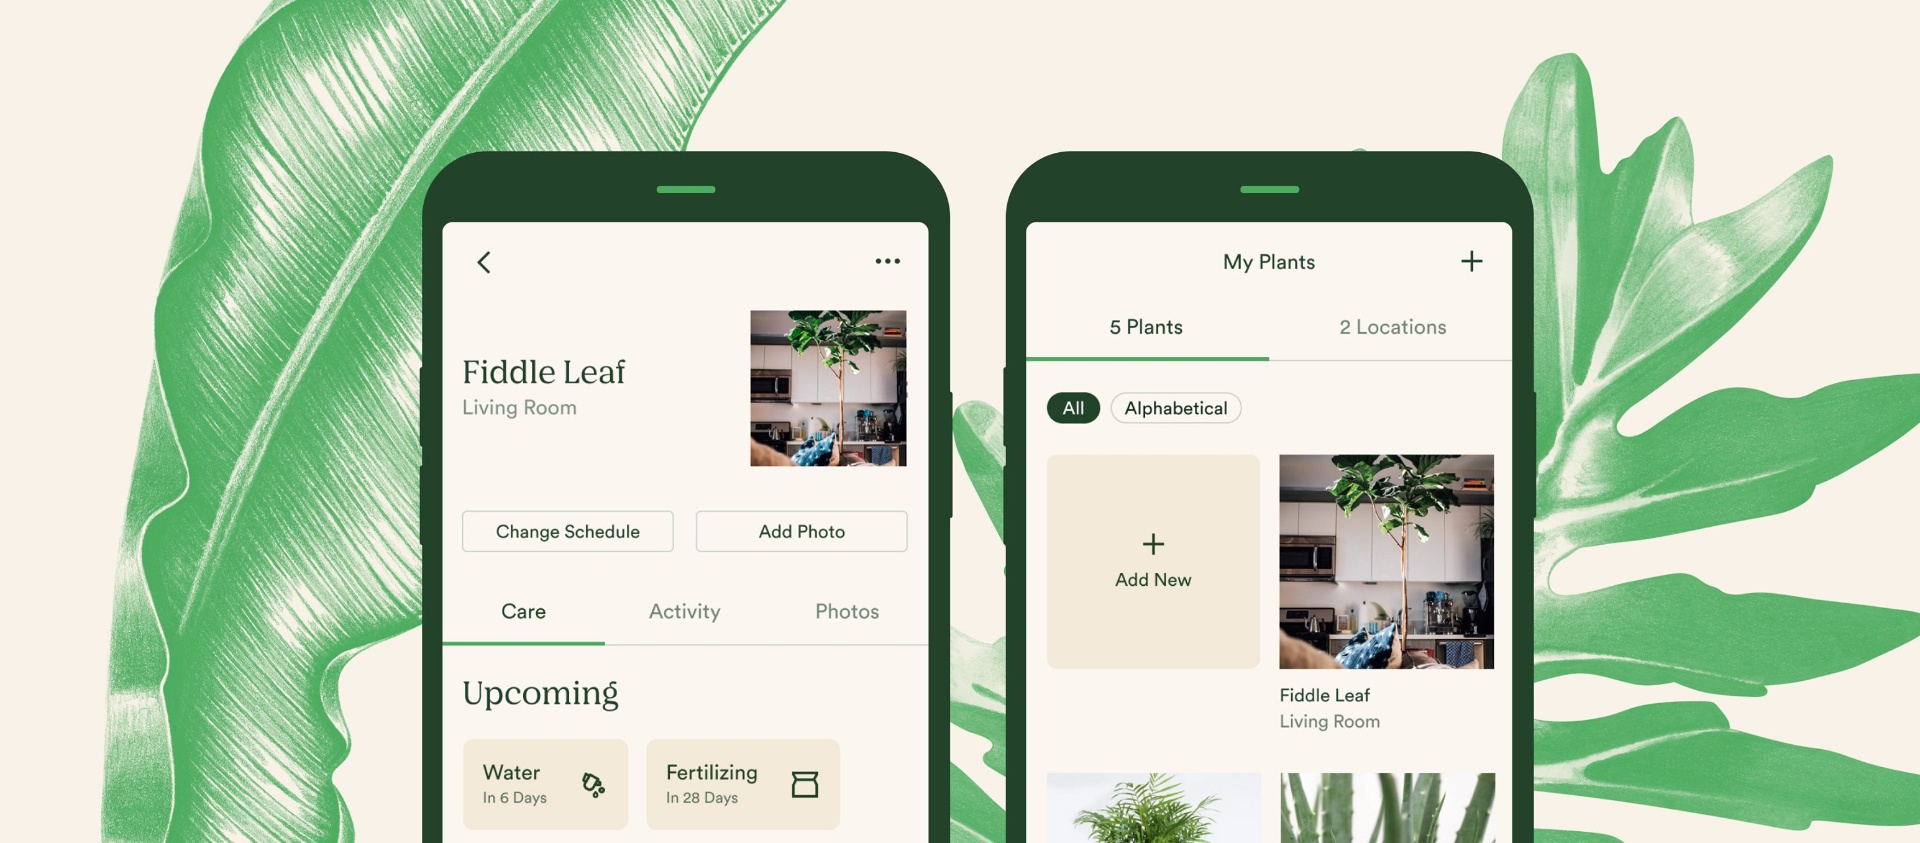 App to Learn How to Care for Plants: See How to Download Vera for Free